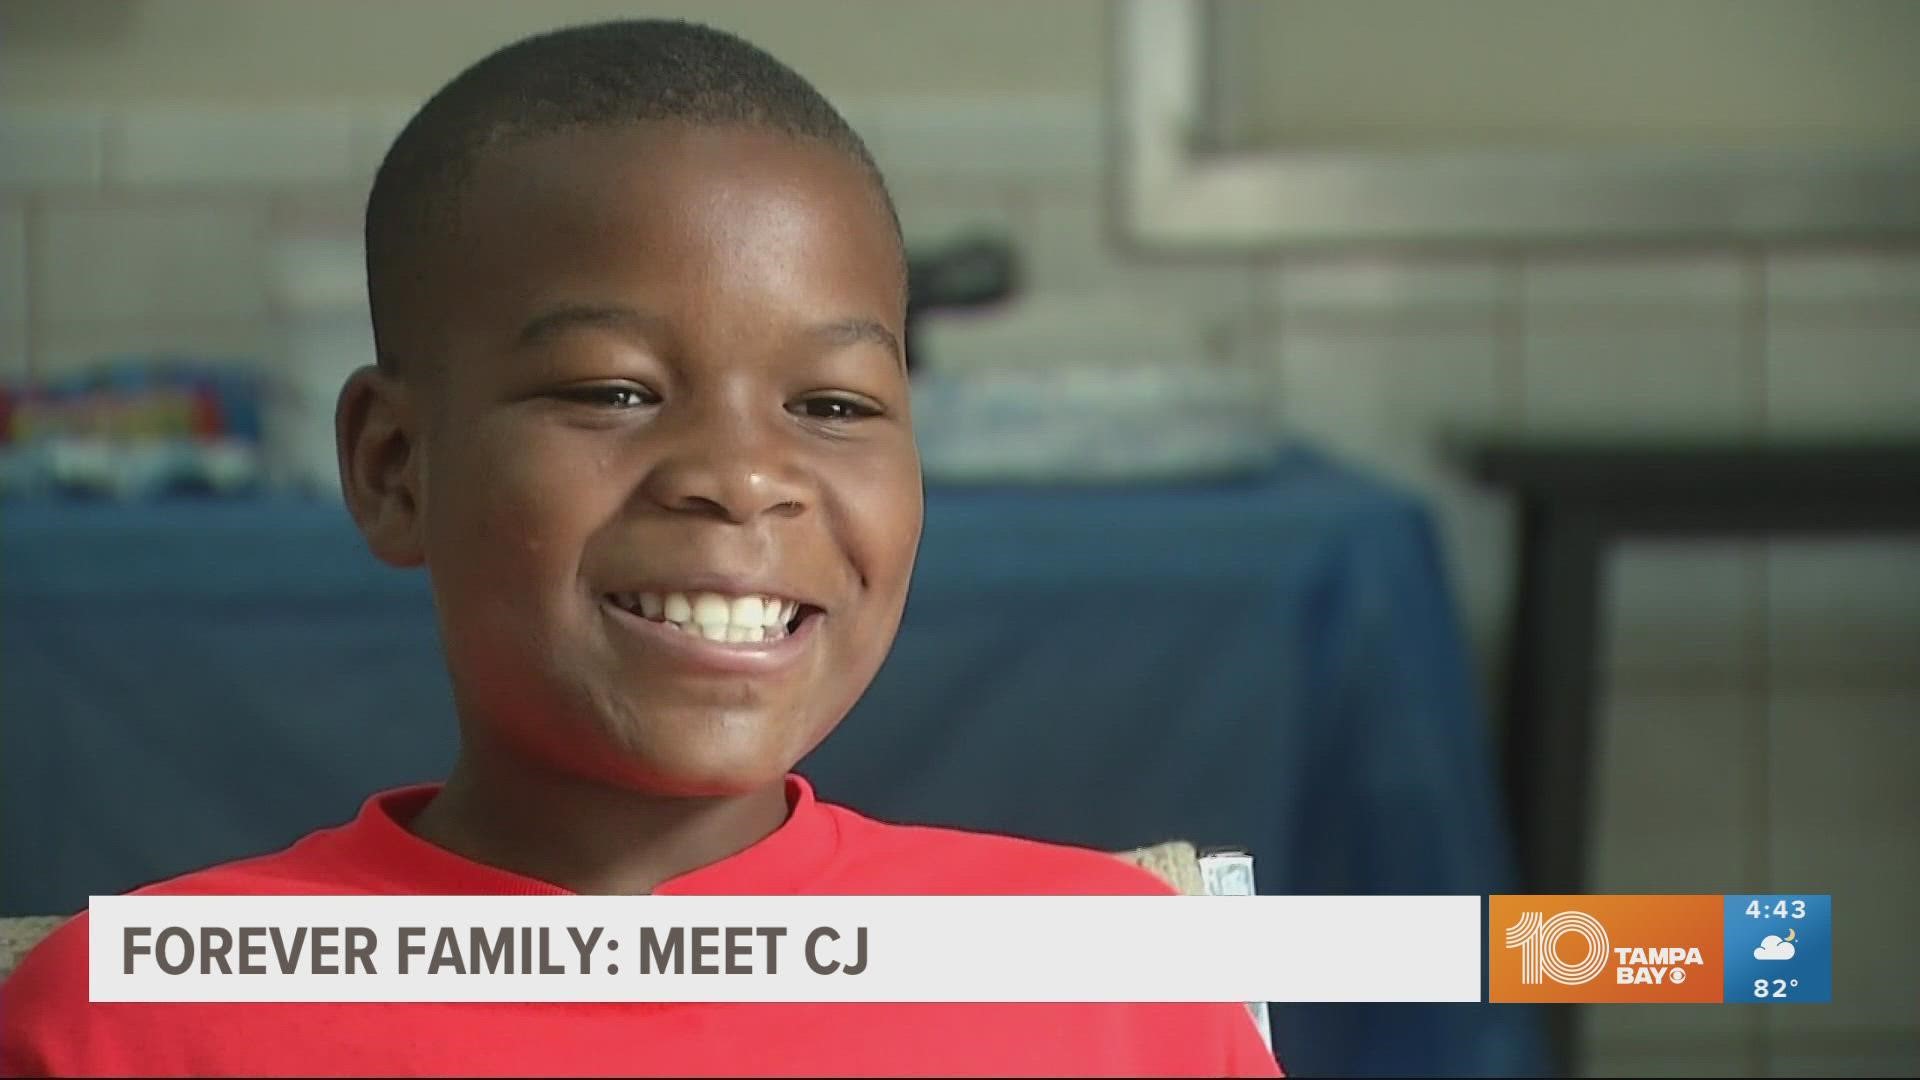 10-year-old CJ has a knack for figuring out games and loves playing Minecraft.